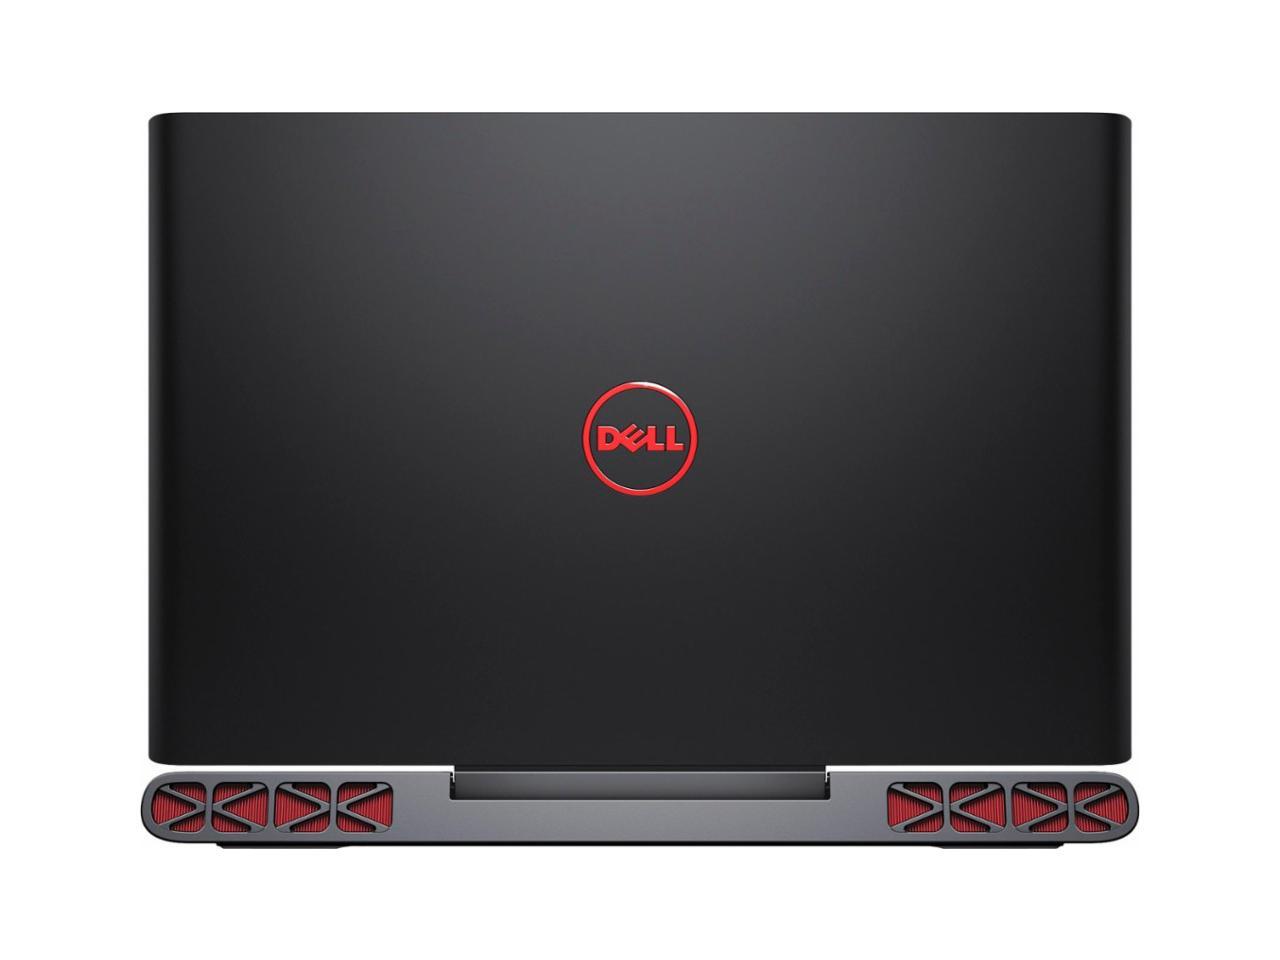 Dell - Inspiron 15.6" Laptop - Intel Core i5 - 8GB Memory - NVIDIA GeForce GTX 1050 Ti - 256GB Solid State Drive - Black Gaming Notebook Laptop PC Computer I7567-5650BLK-PUS